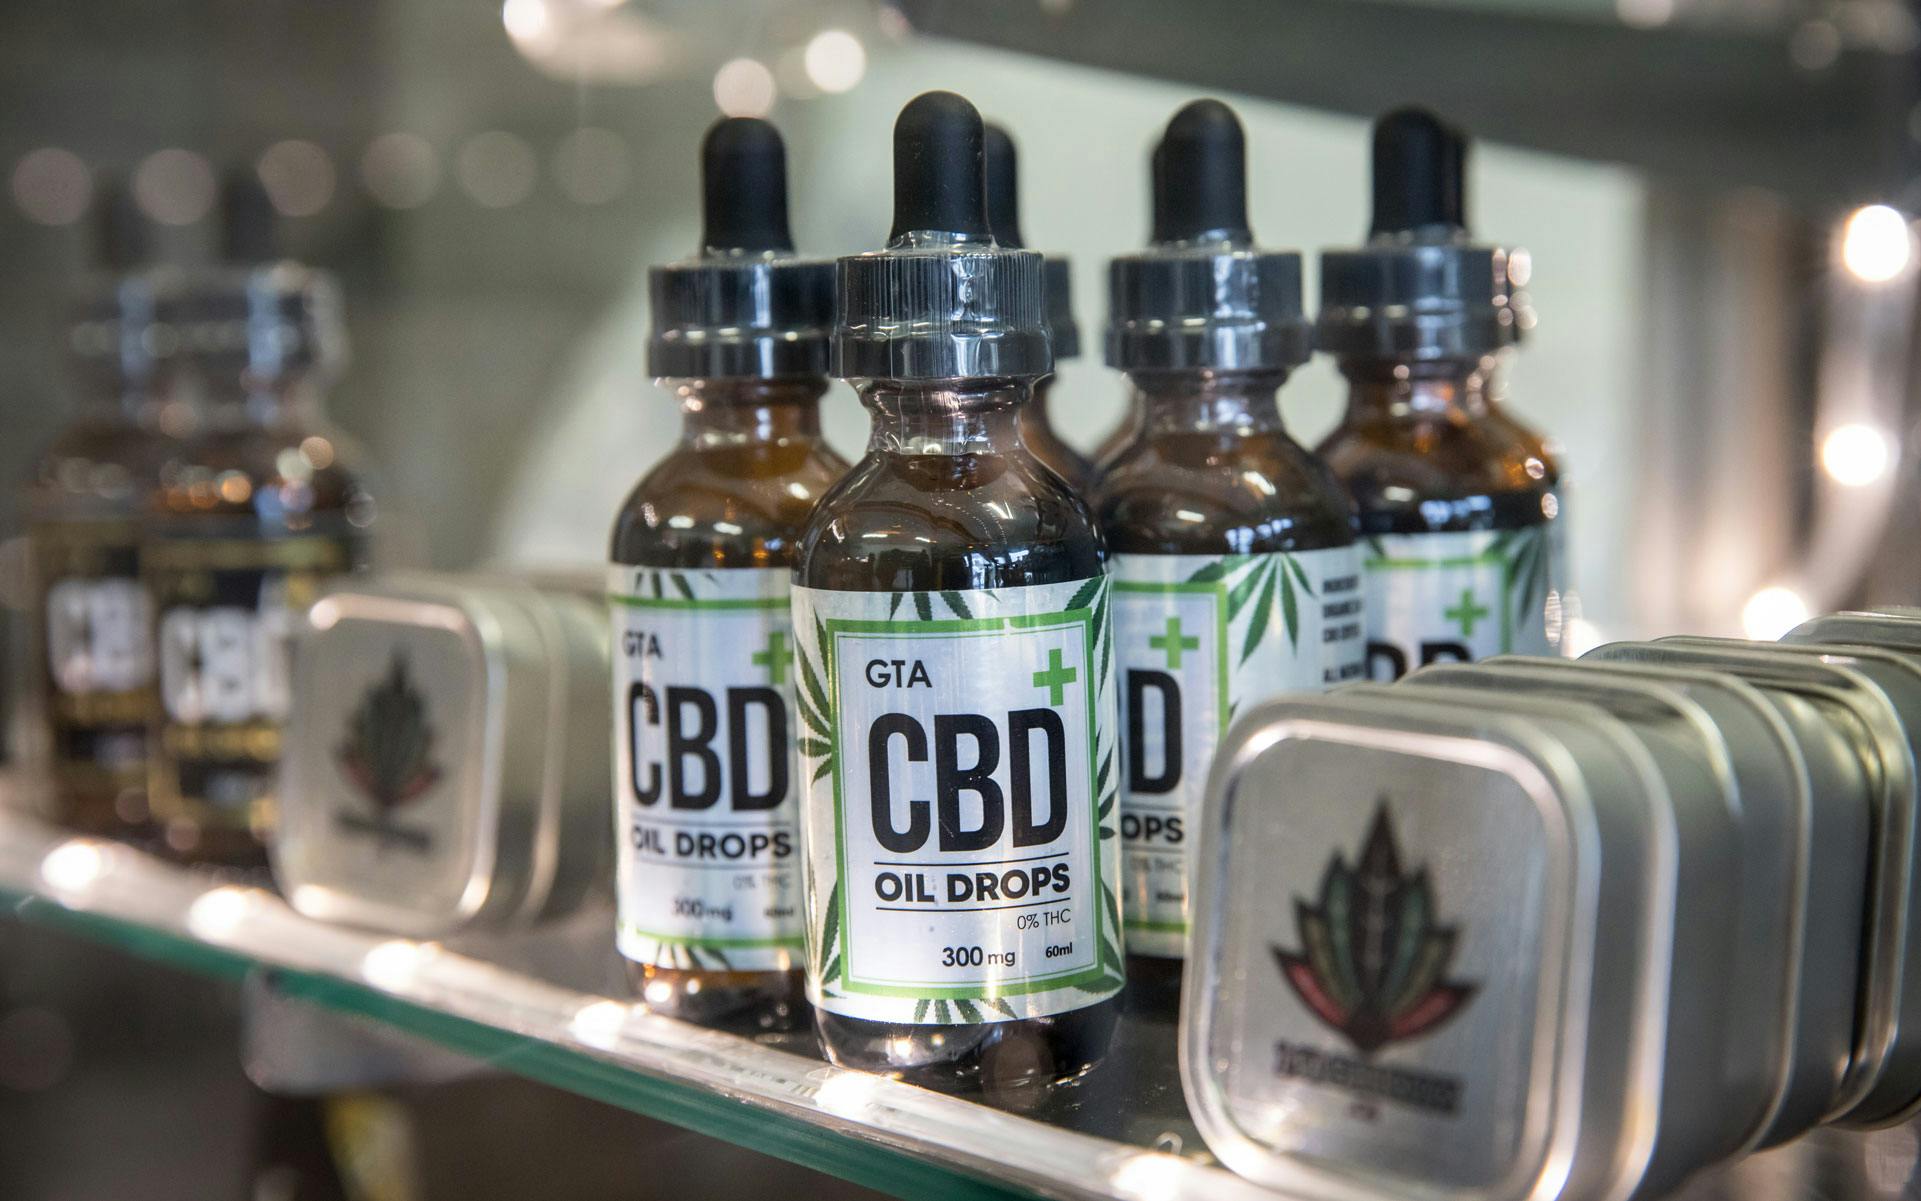 UK steps up CBD regulation, sets pull-by date for rogue products